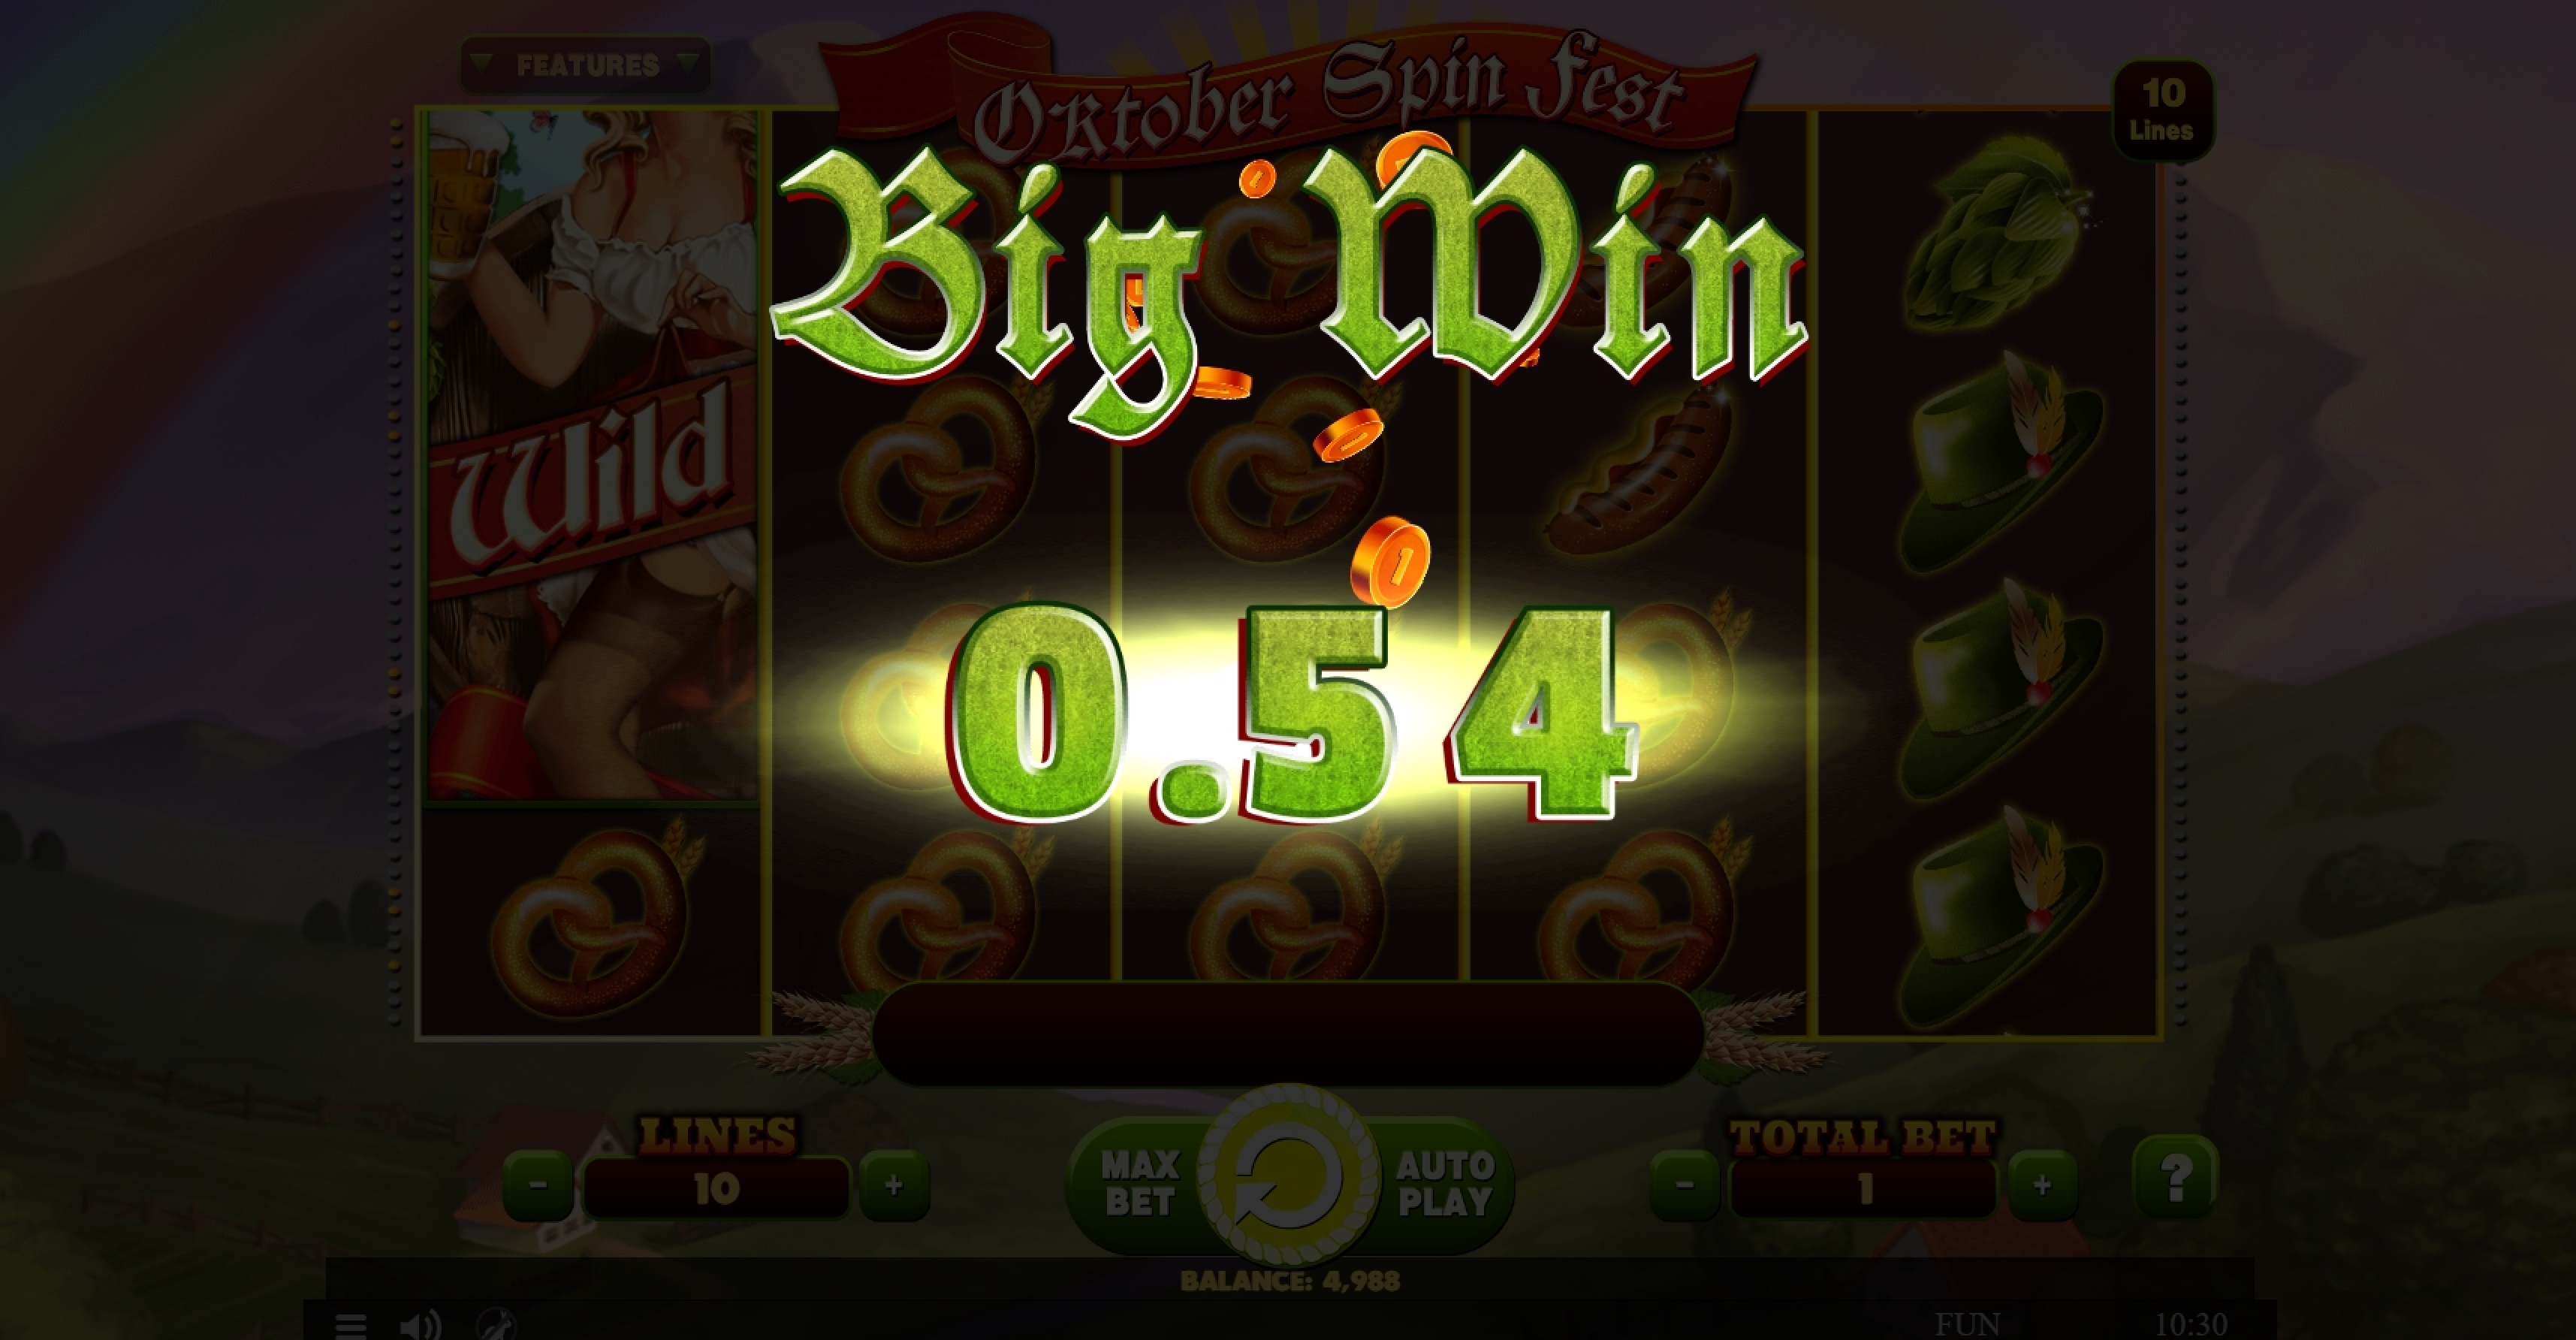 Win Money in October Spin Fest Free Slot Game by Spinomenal